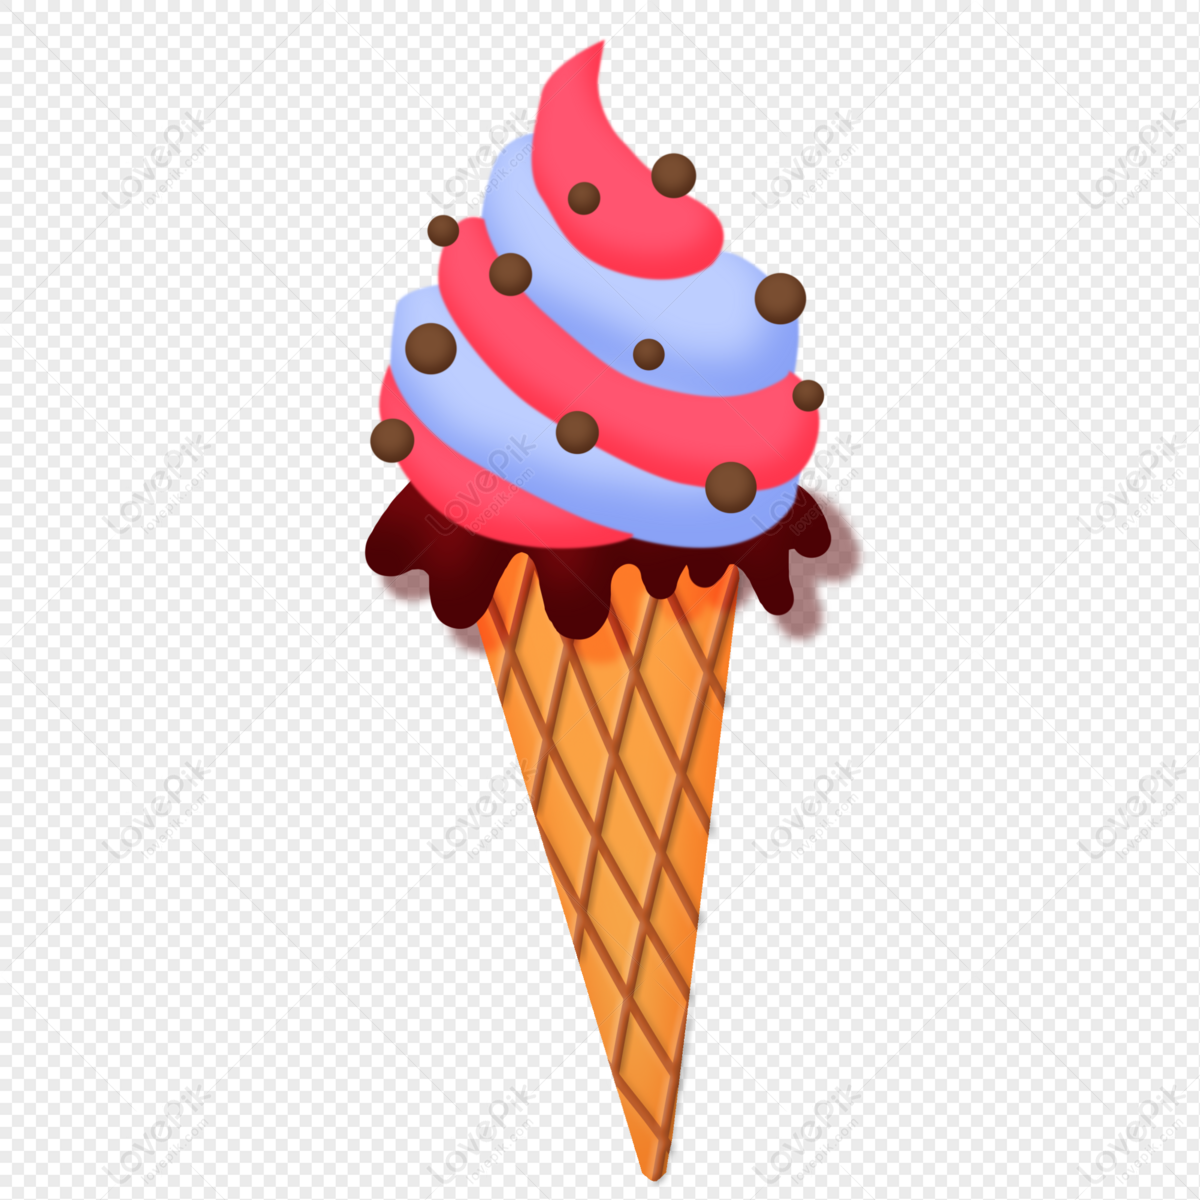 Hand Drawn Cartoon Colorful Ice Cream PNG Transparent Image And Clipart  Image For Free Download - Lovepik | 401220727